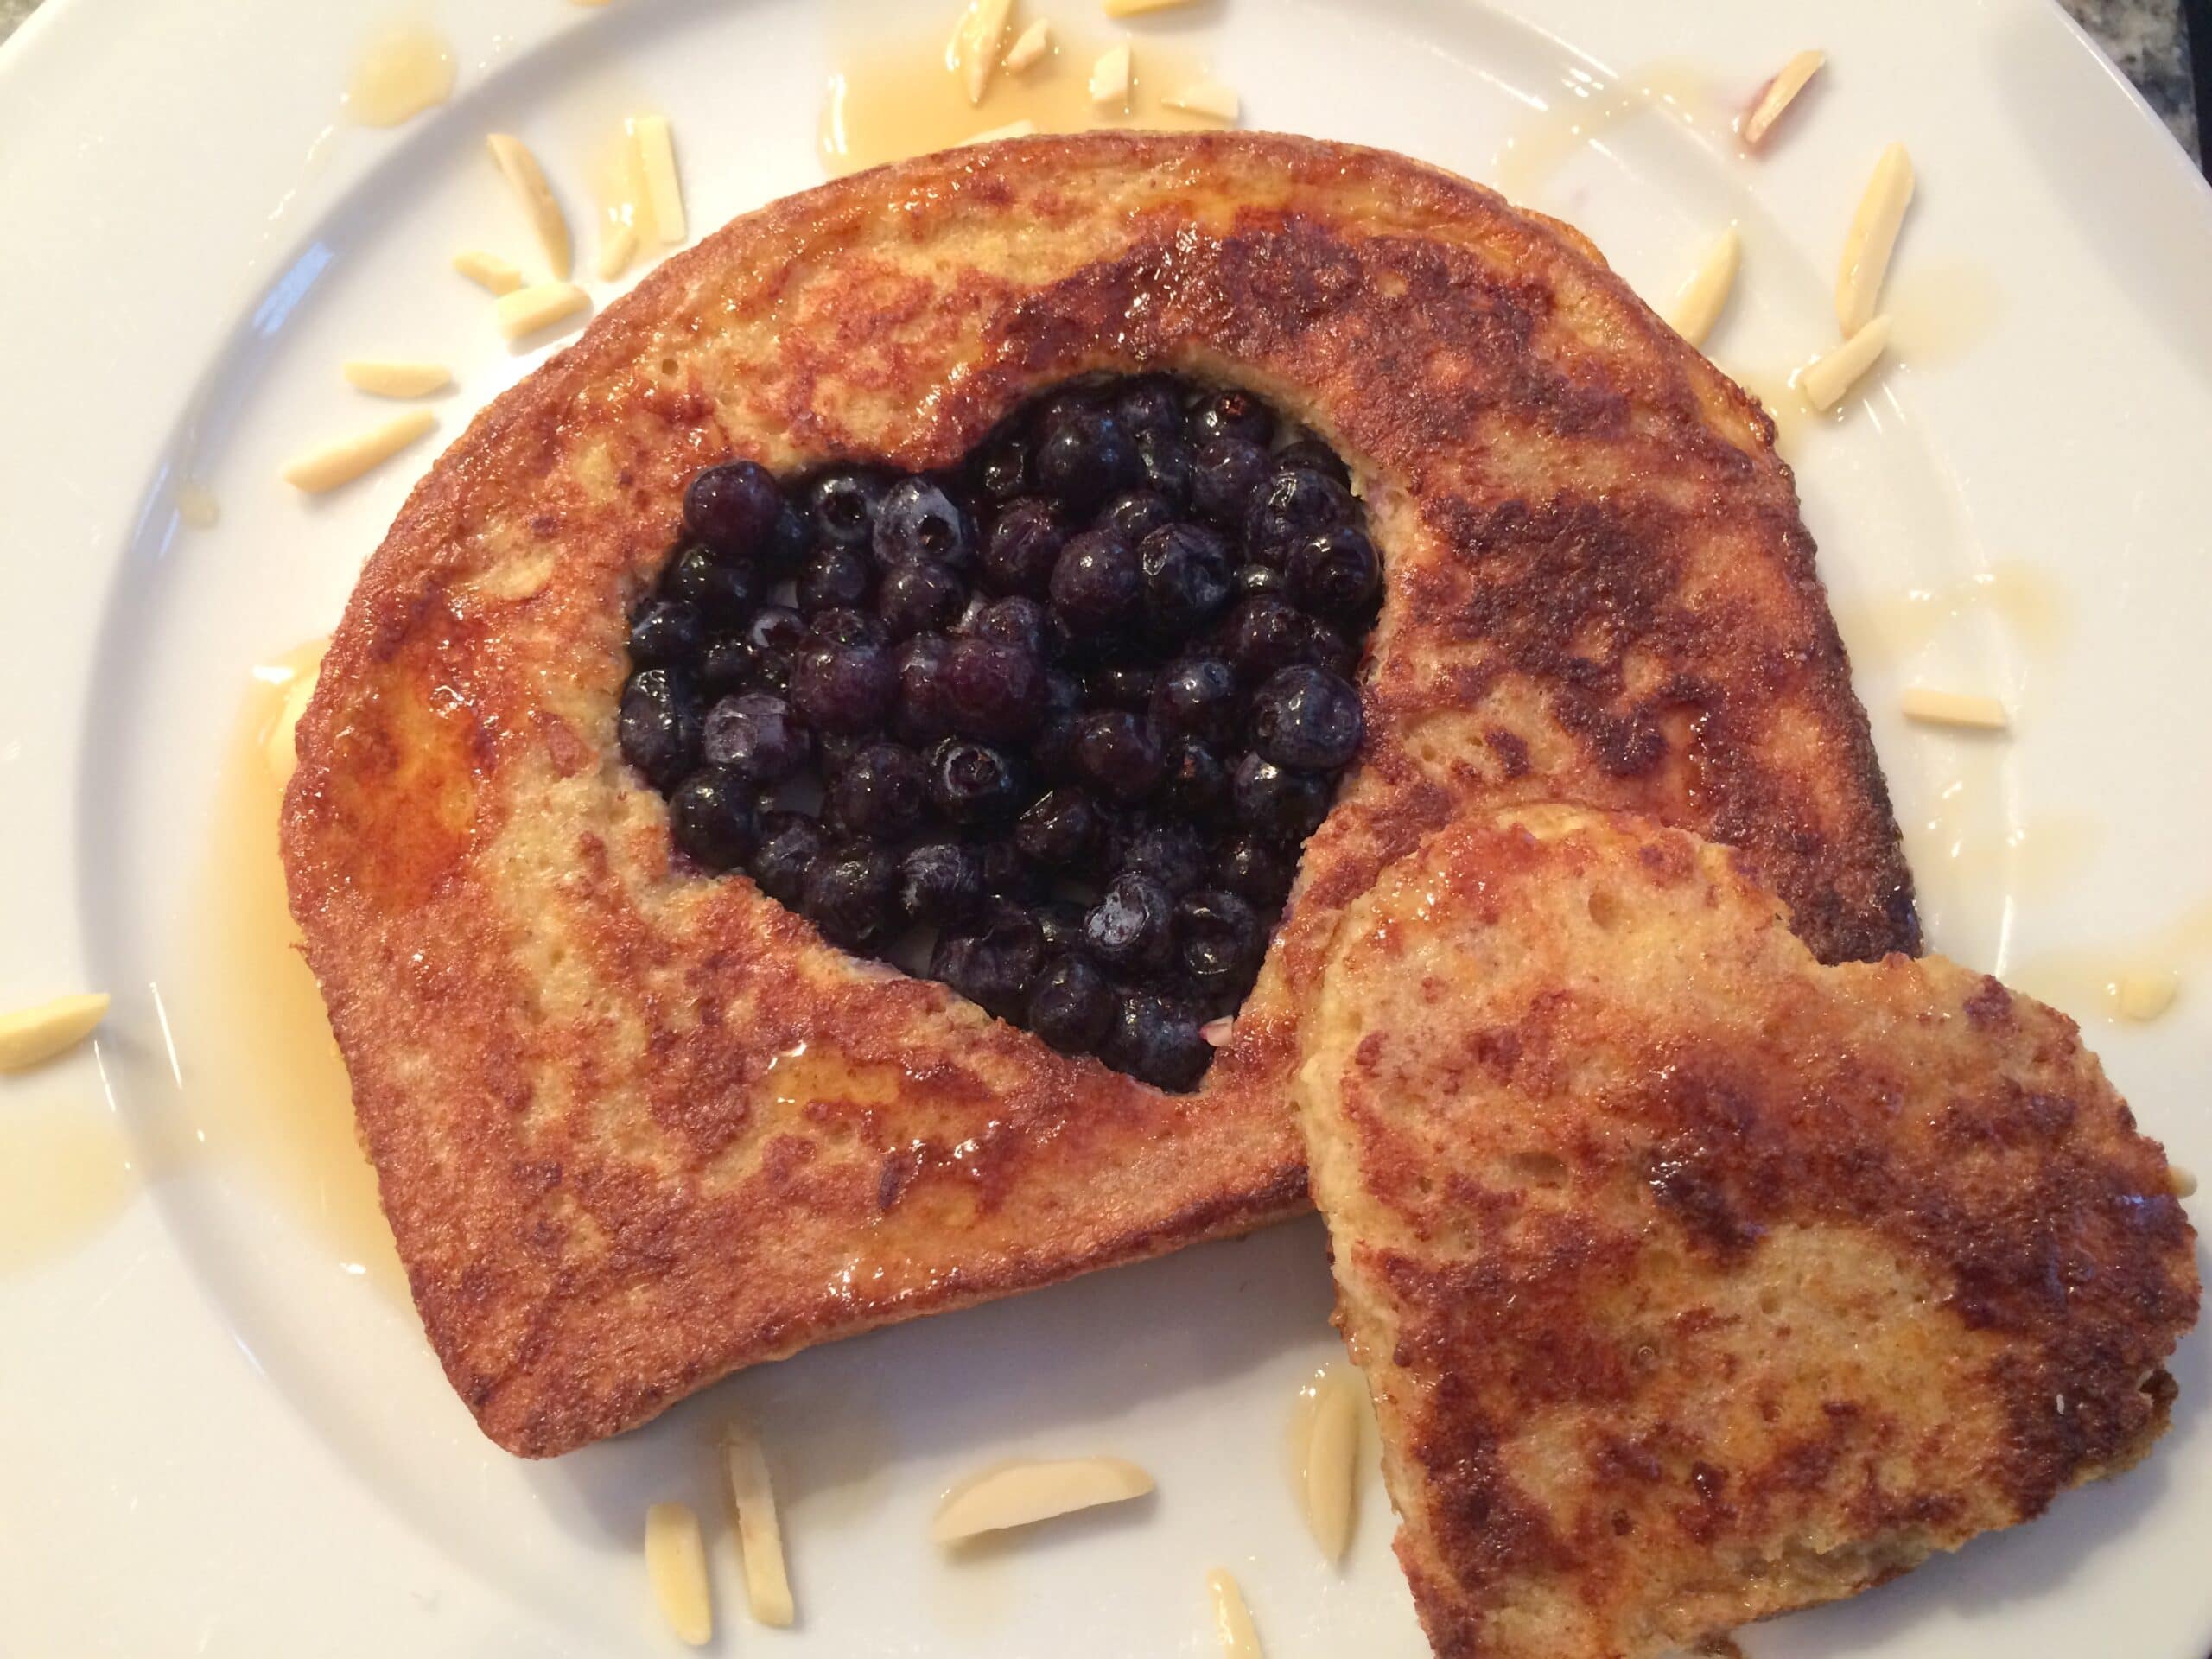 It's easy to make healthier french toast at home. Check out this simple recipe from halsanutrition.com.